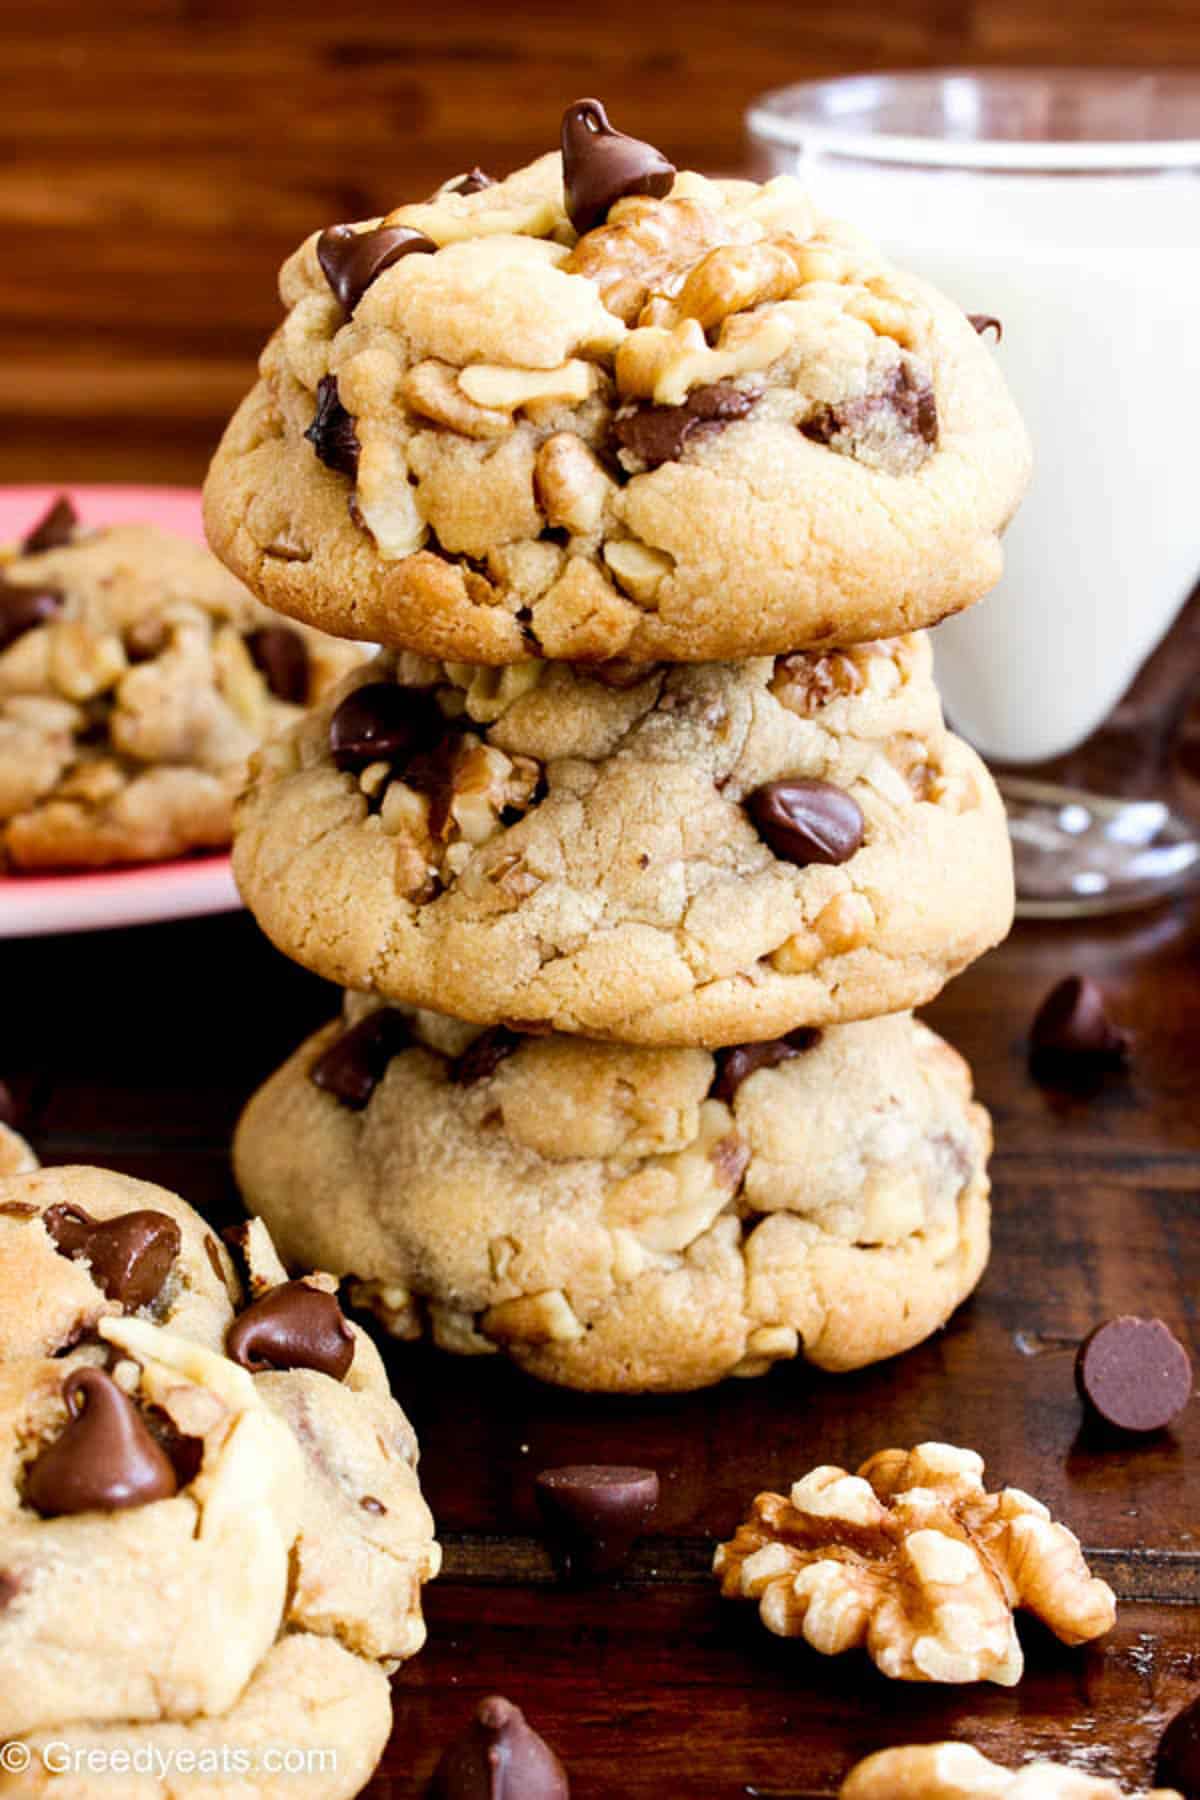 The best Chocolate Chip Cookies recipe filled with walnuts and melty chocolate chips.